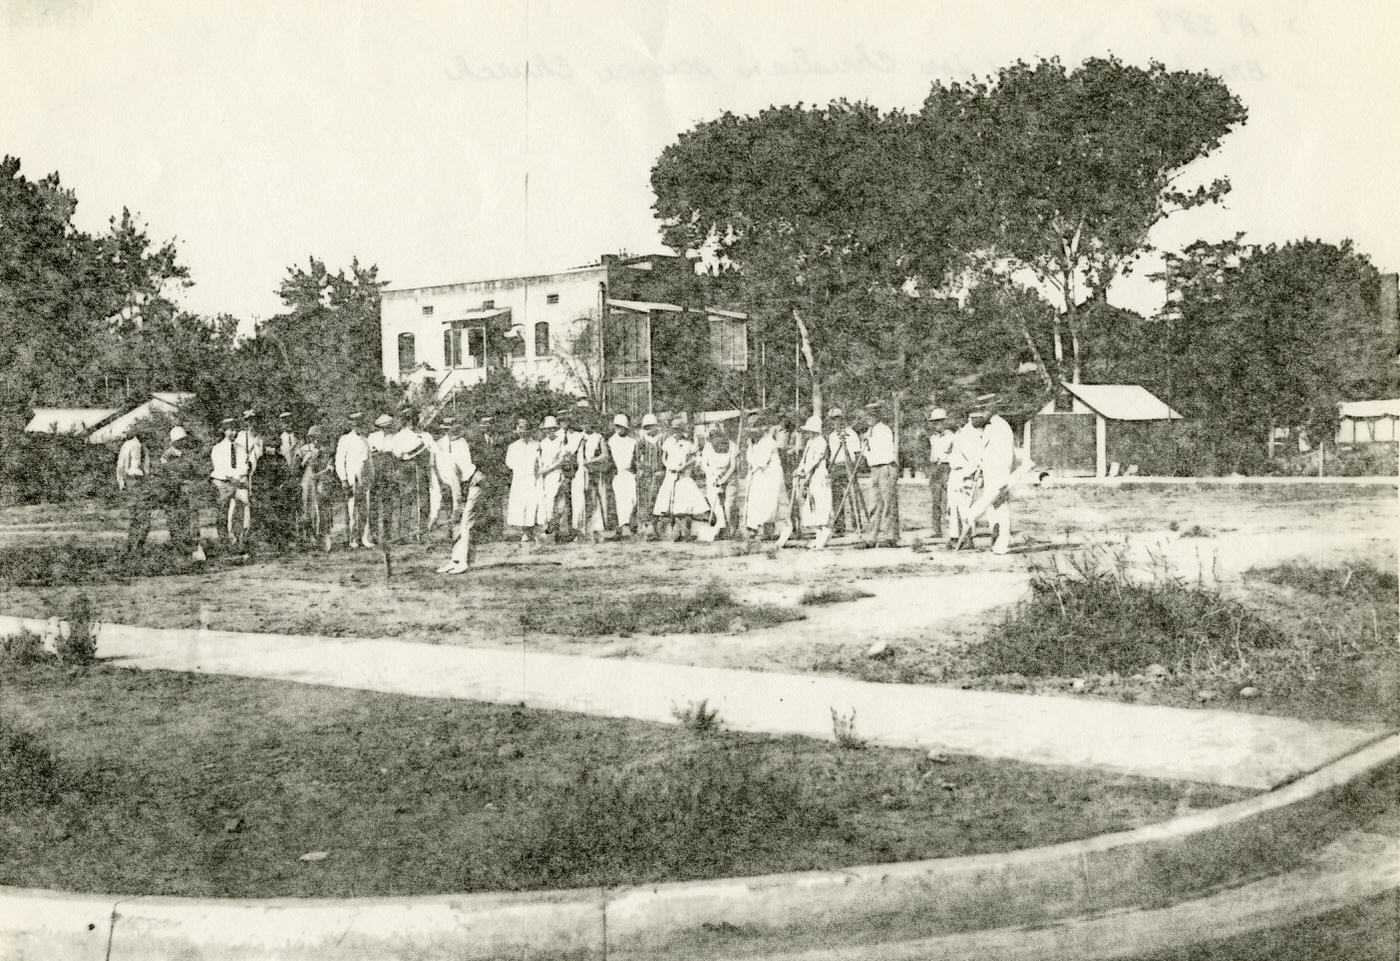 Groundbreaking for Christian Science Church, 1925